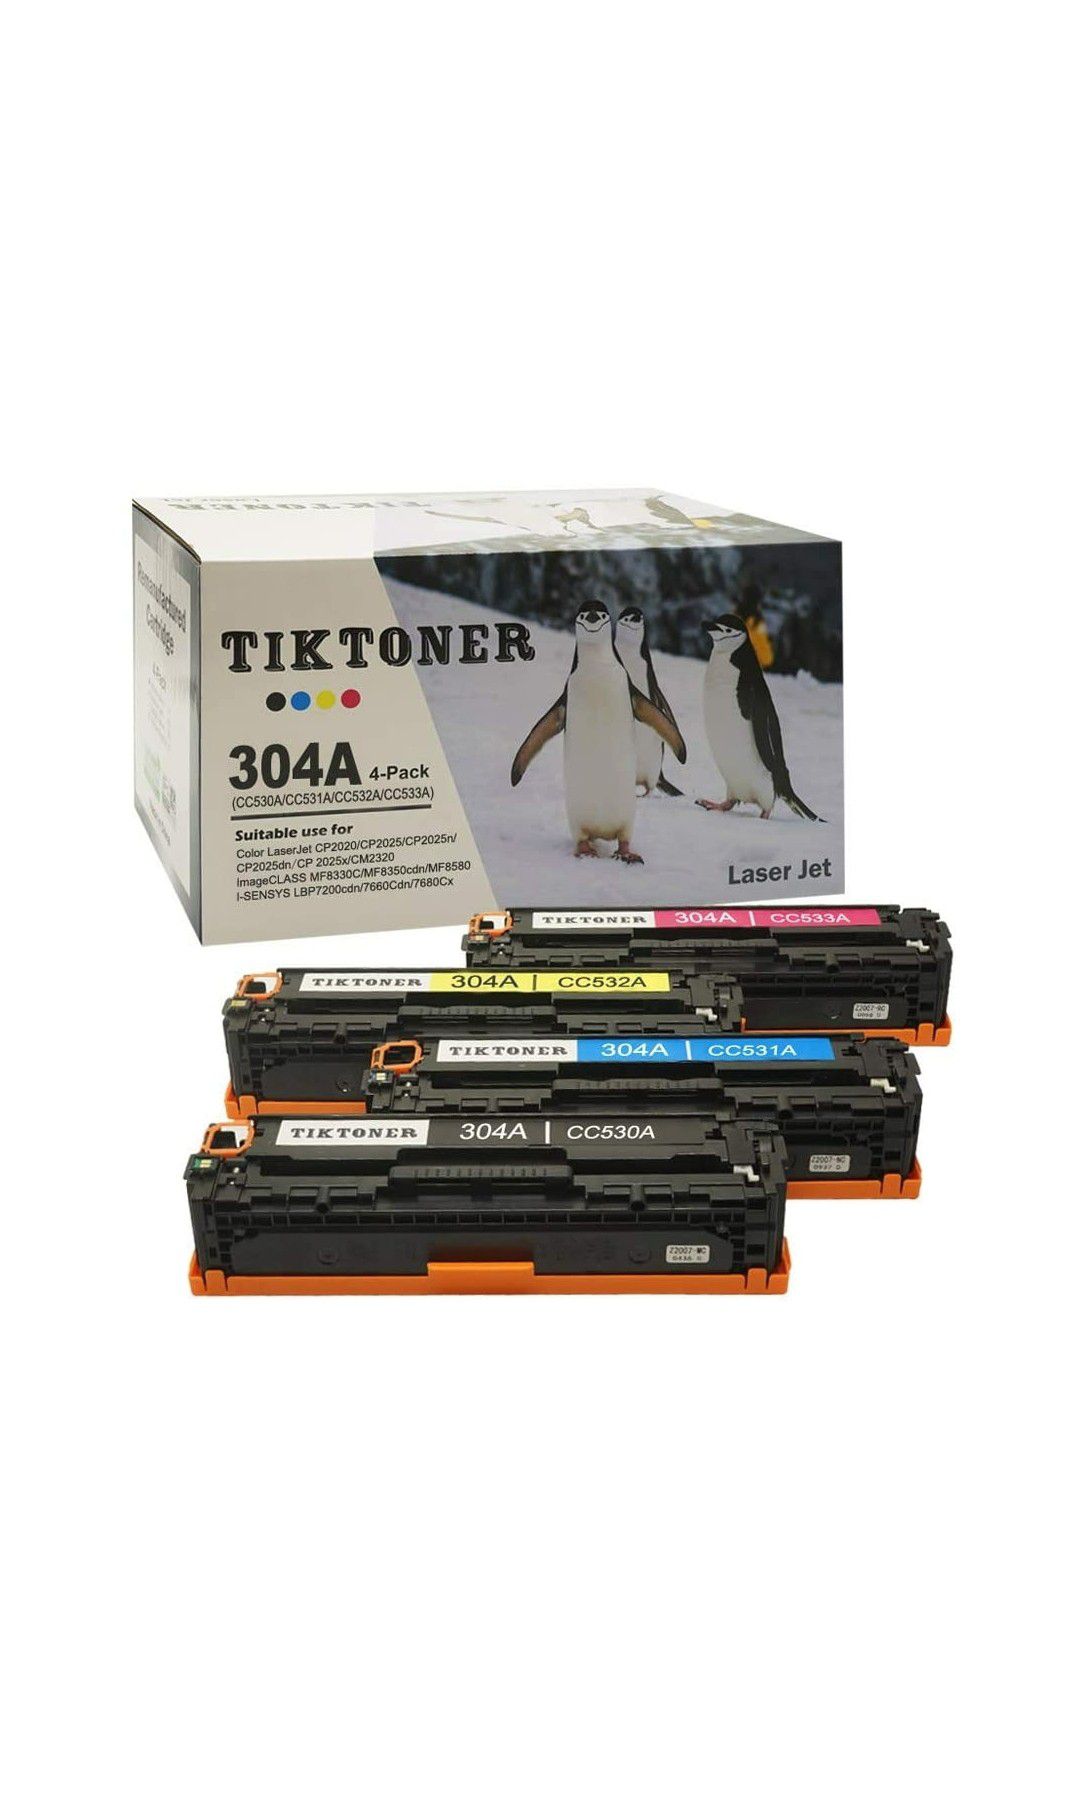 Toner Cartridge Replacement for HP and Canon Printer